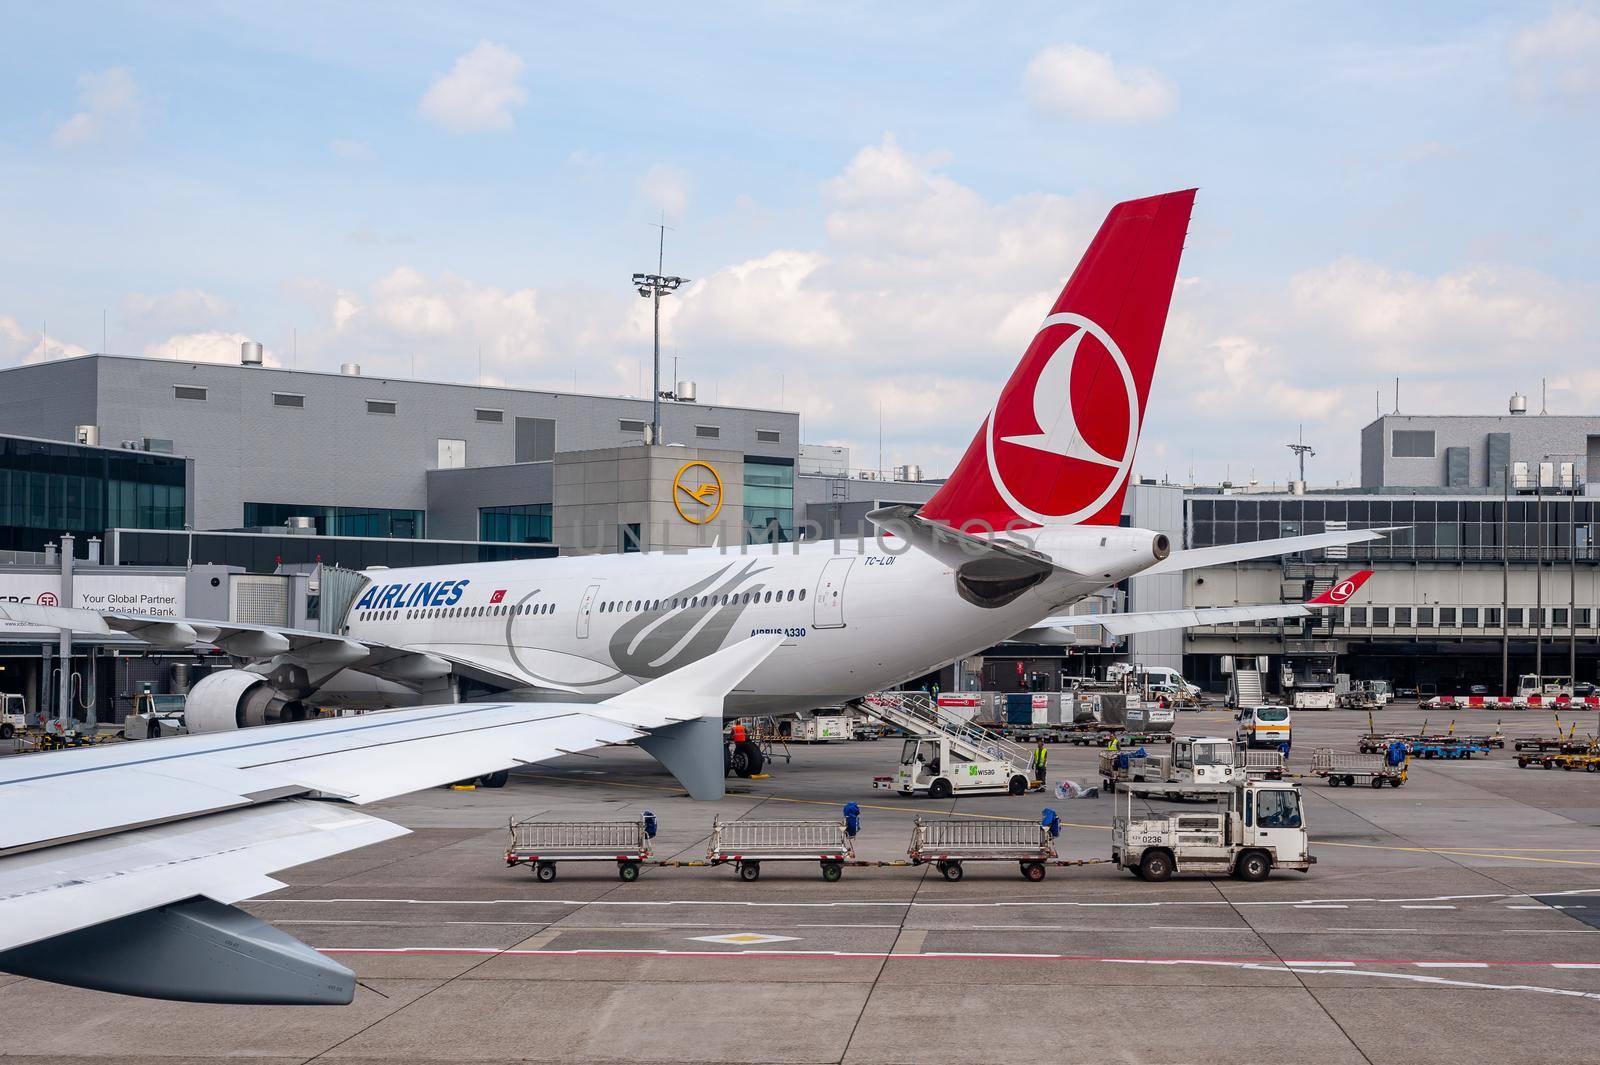 05/26/2019. Frankfurt Airport, Germany. Turkish airliner in front of main terminal. Airport operated by Fraport and serves as the main hub for Lufthansa including Lufthansa City Line and Lufthansa Cargo.